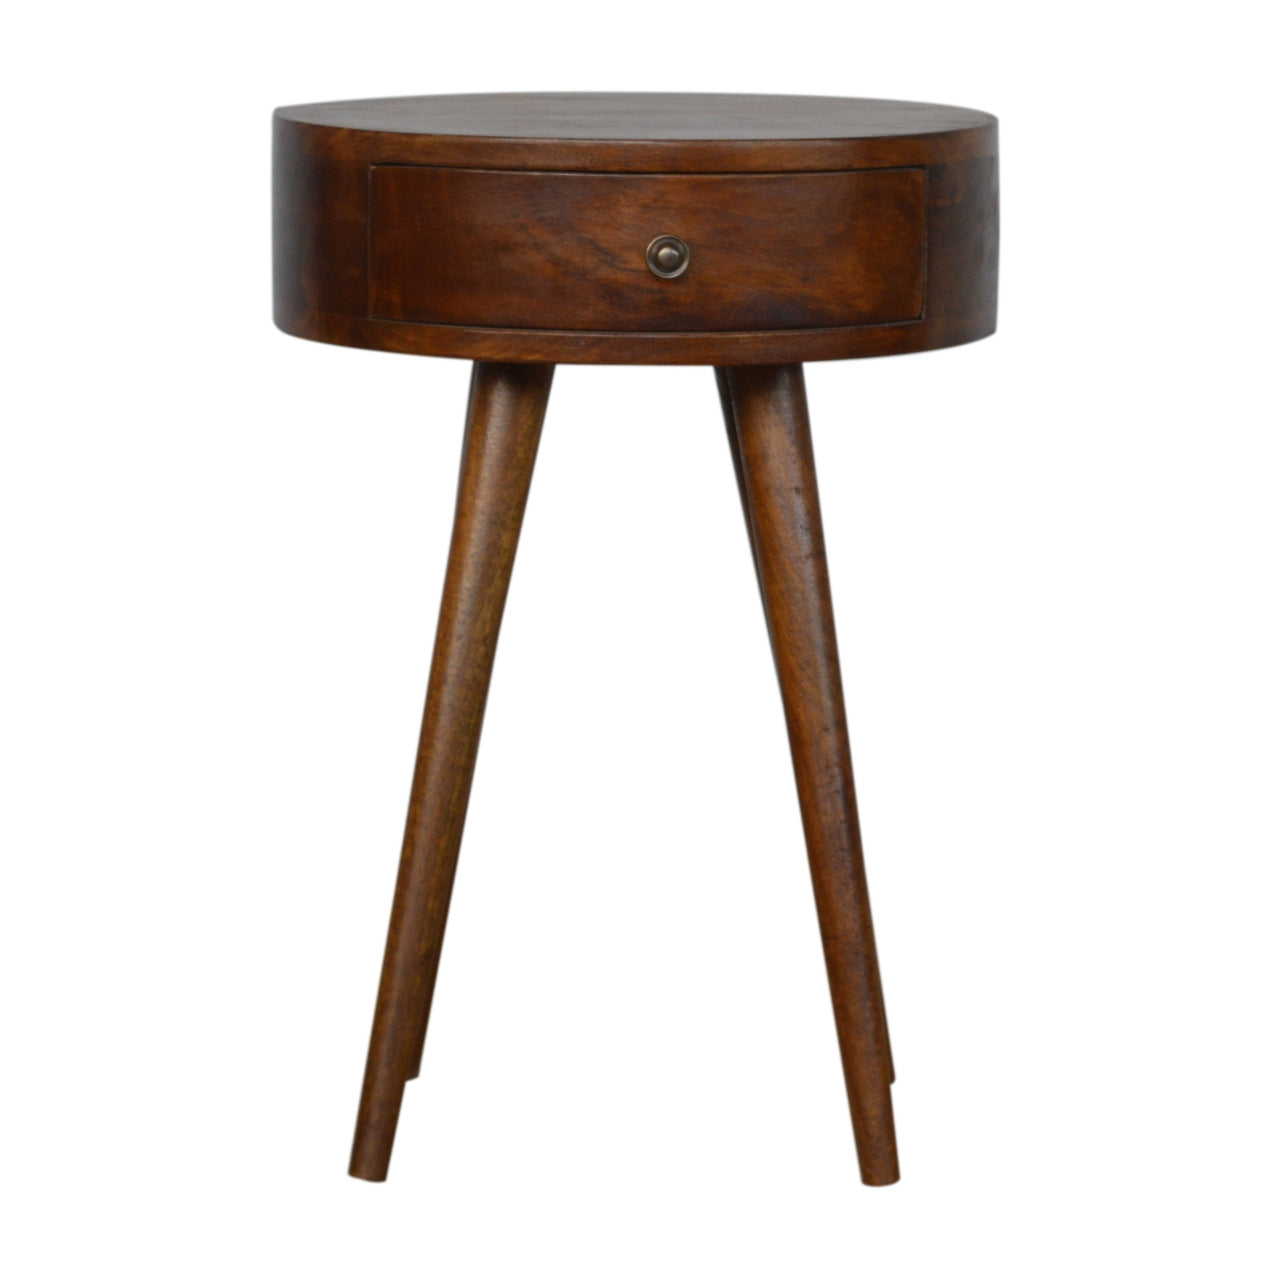 View Nordic Chestnut Circular Shaped Bedside information